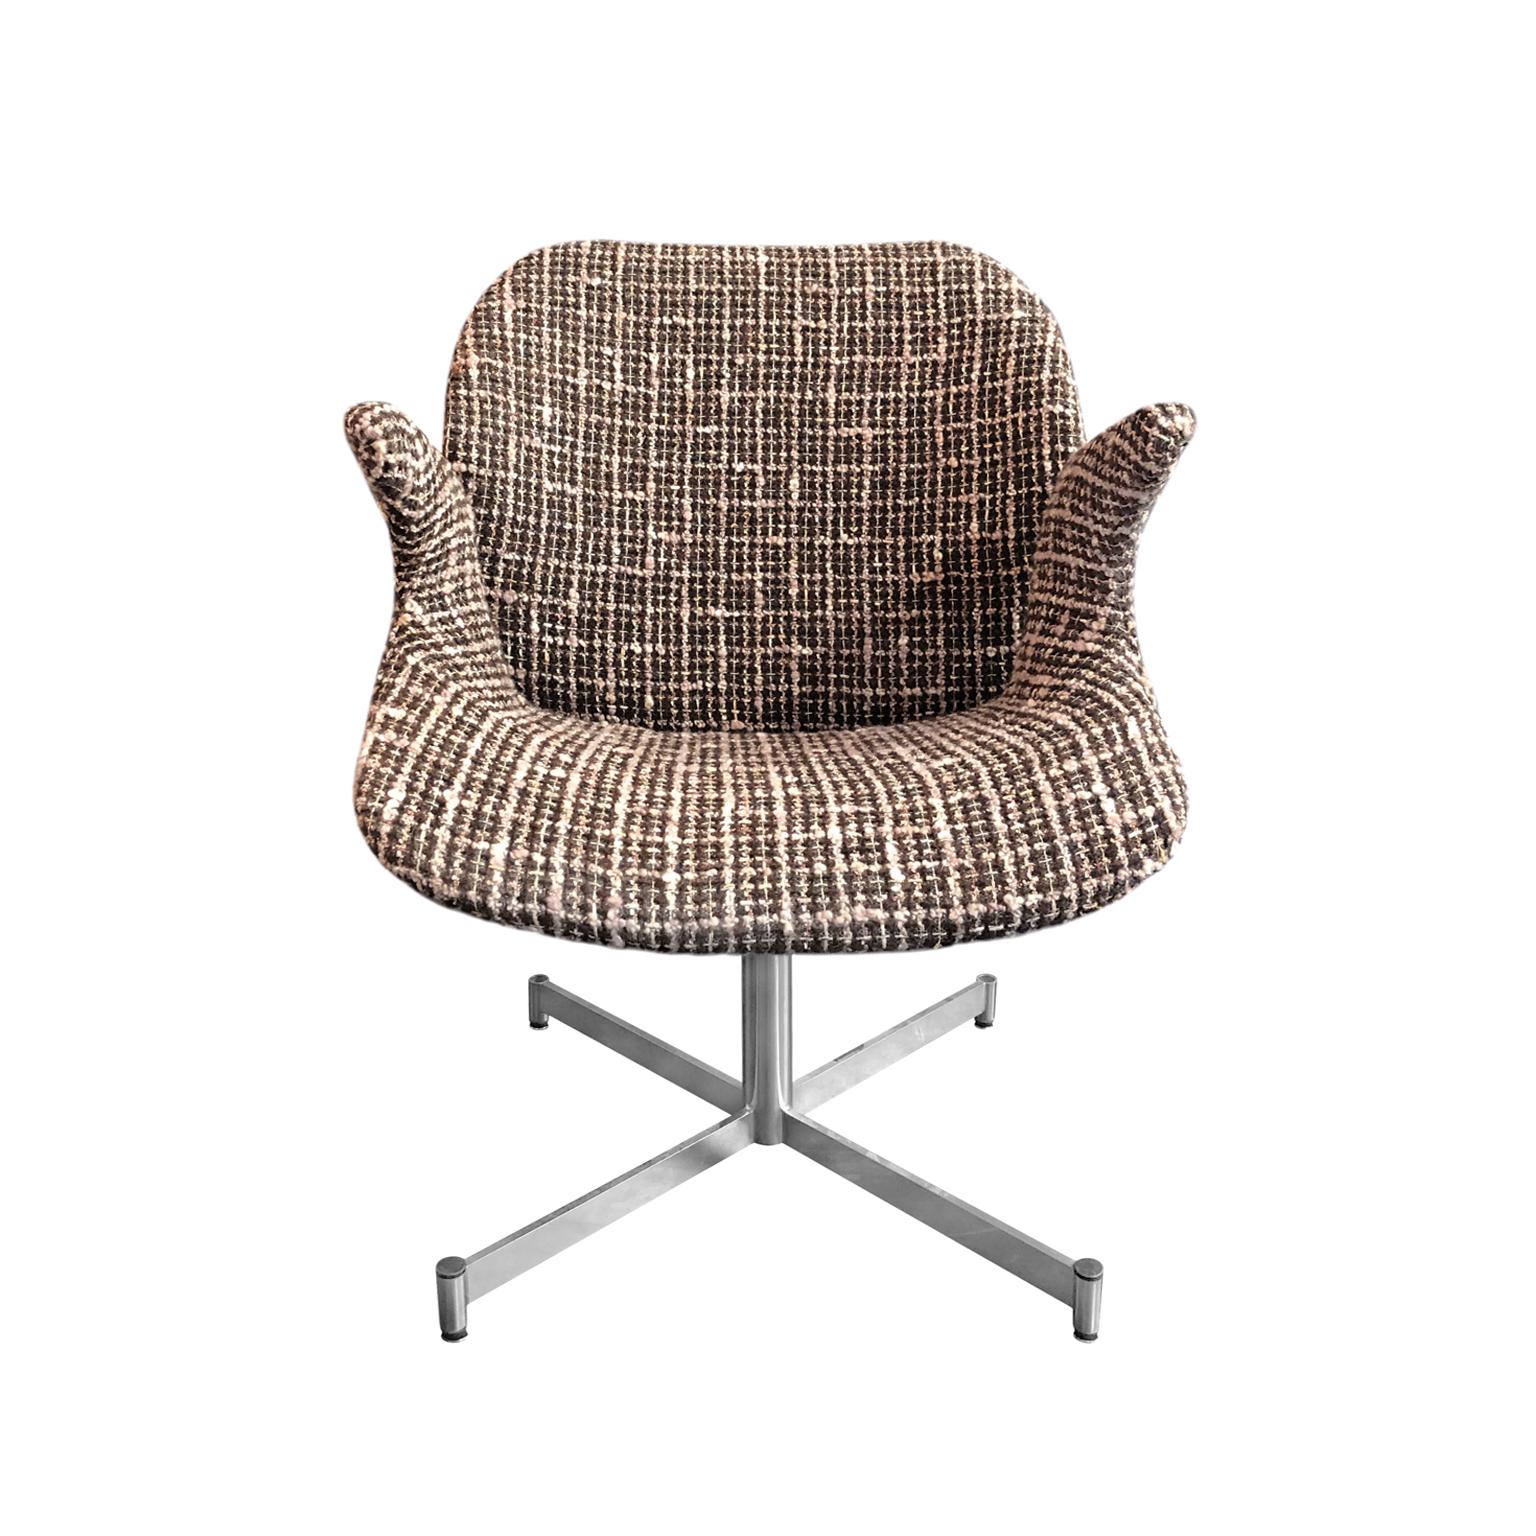 1960s Italian Curved Armchair in Brown and White Bouclé on Chrome Base In Good Condition For Sale In New York, NY